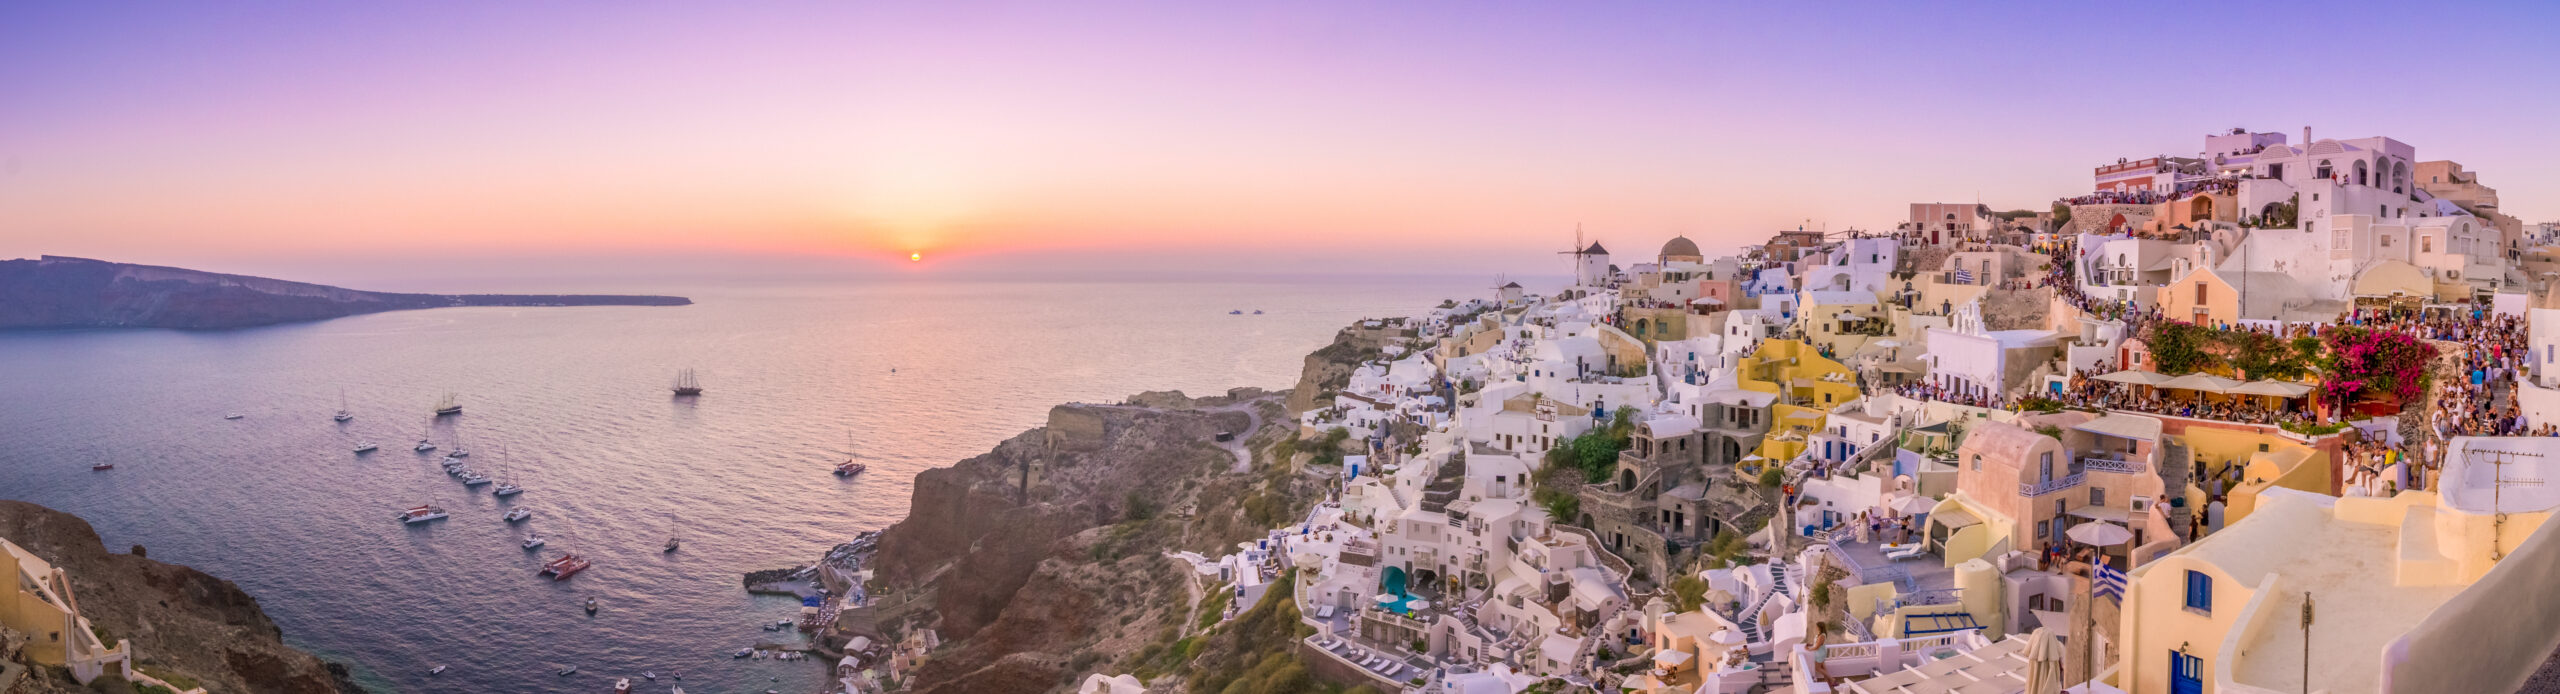 The unknown capital of Santorini that today does not exist